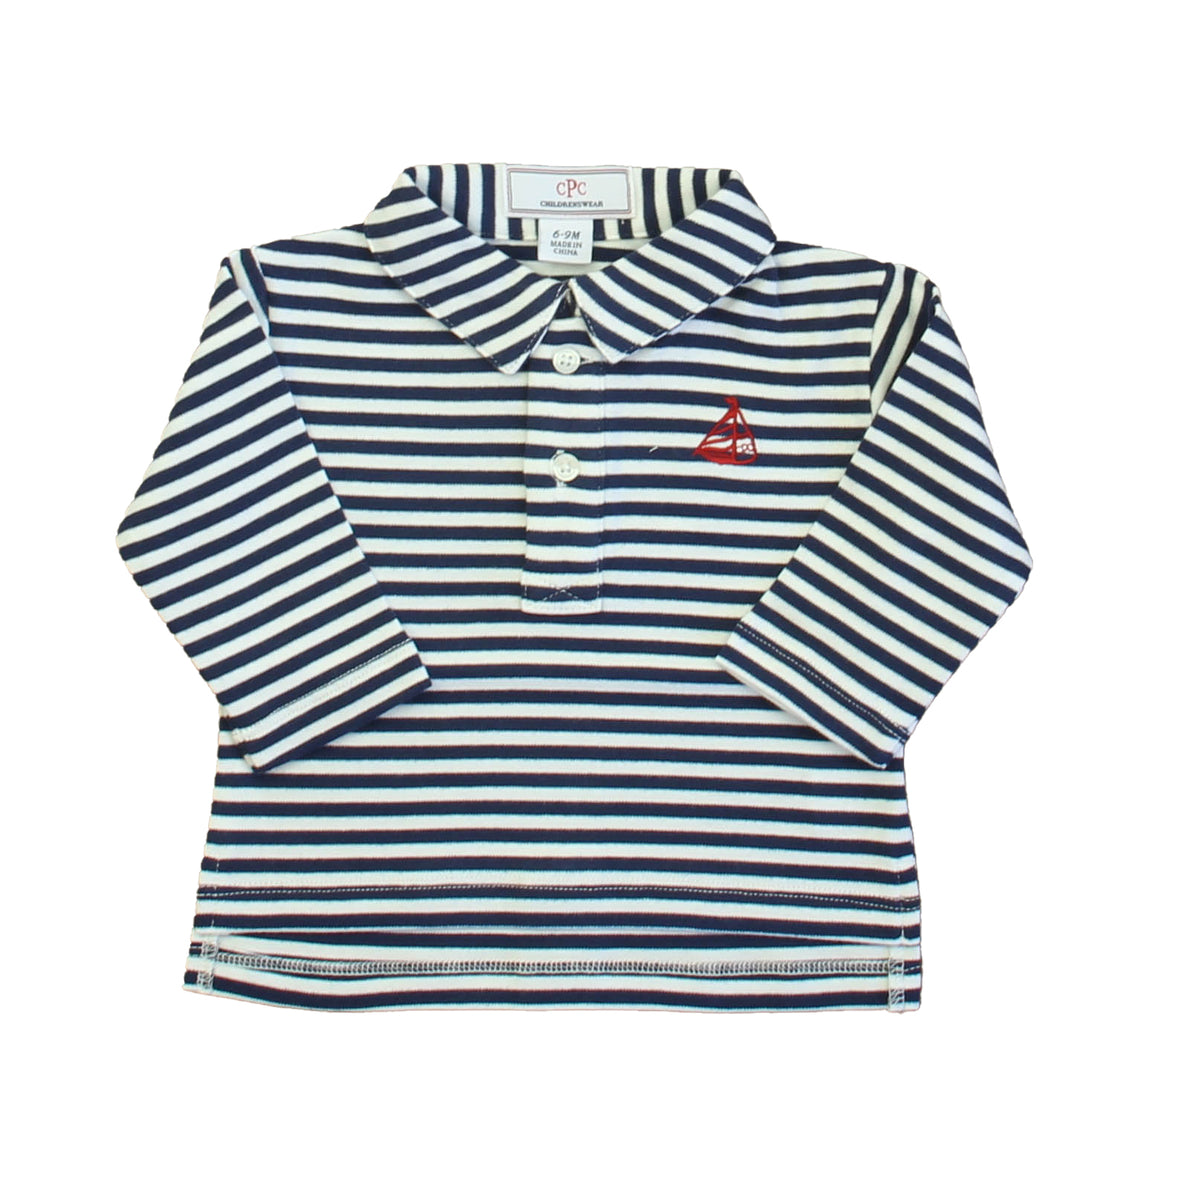 New with Tags: Navy | Bright White | Red Top size: 9-12 Months -- FINAL SALE